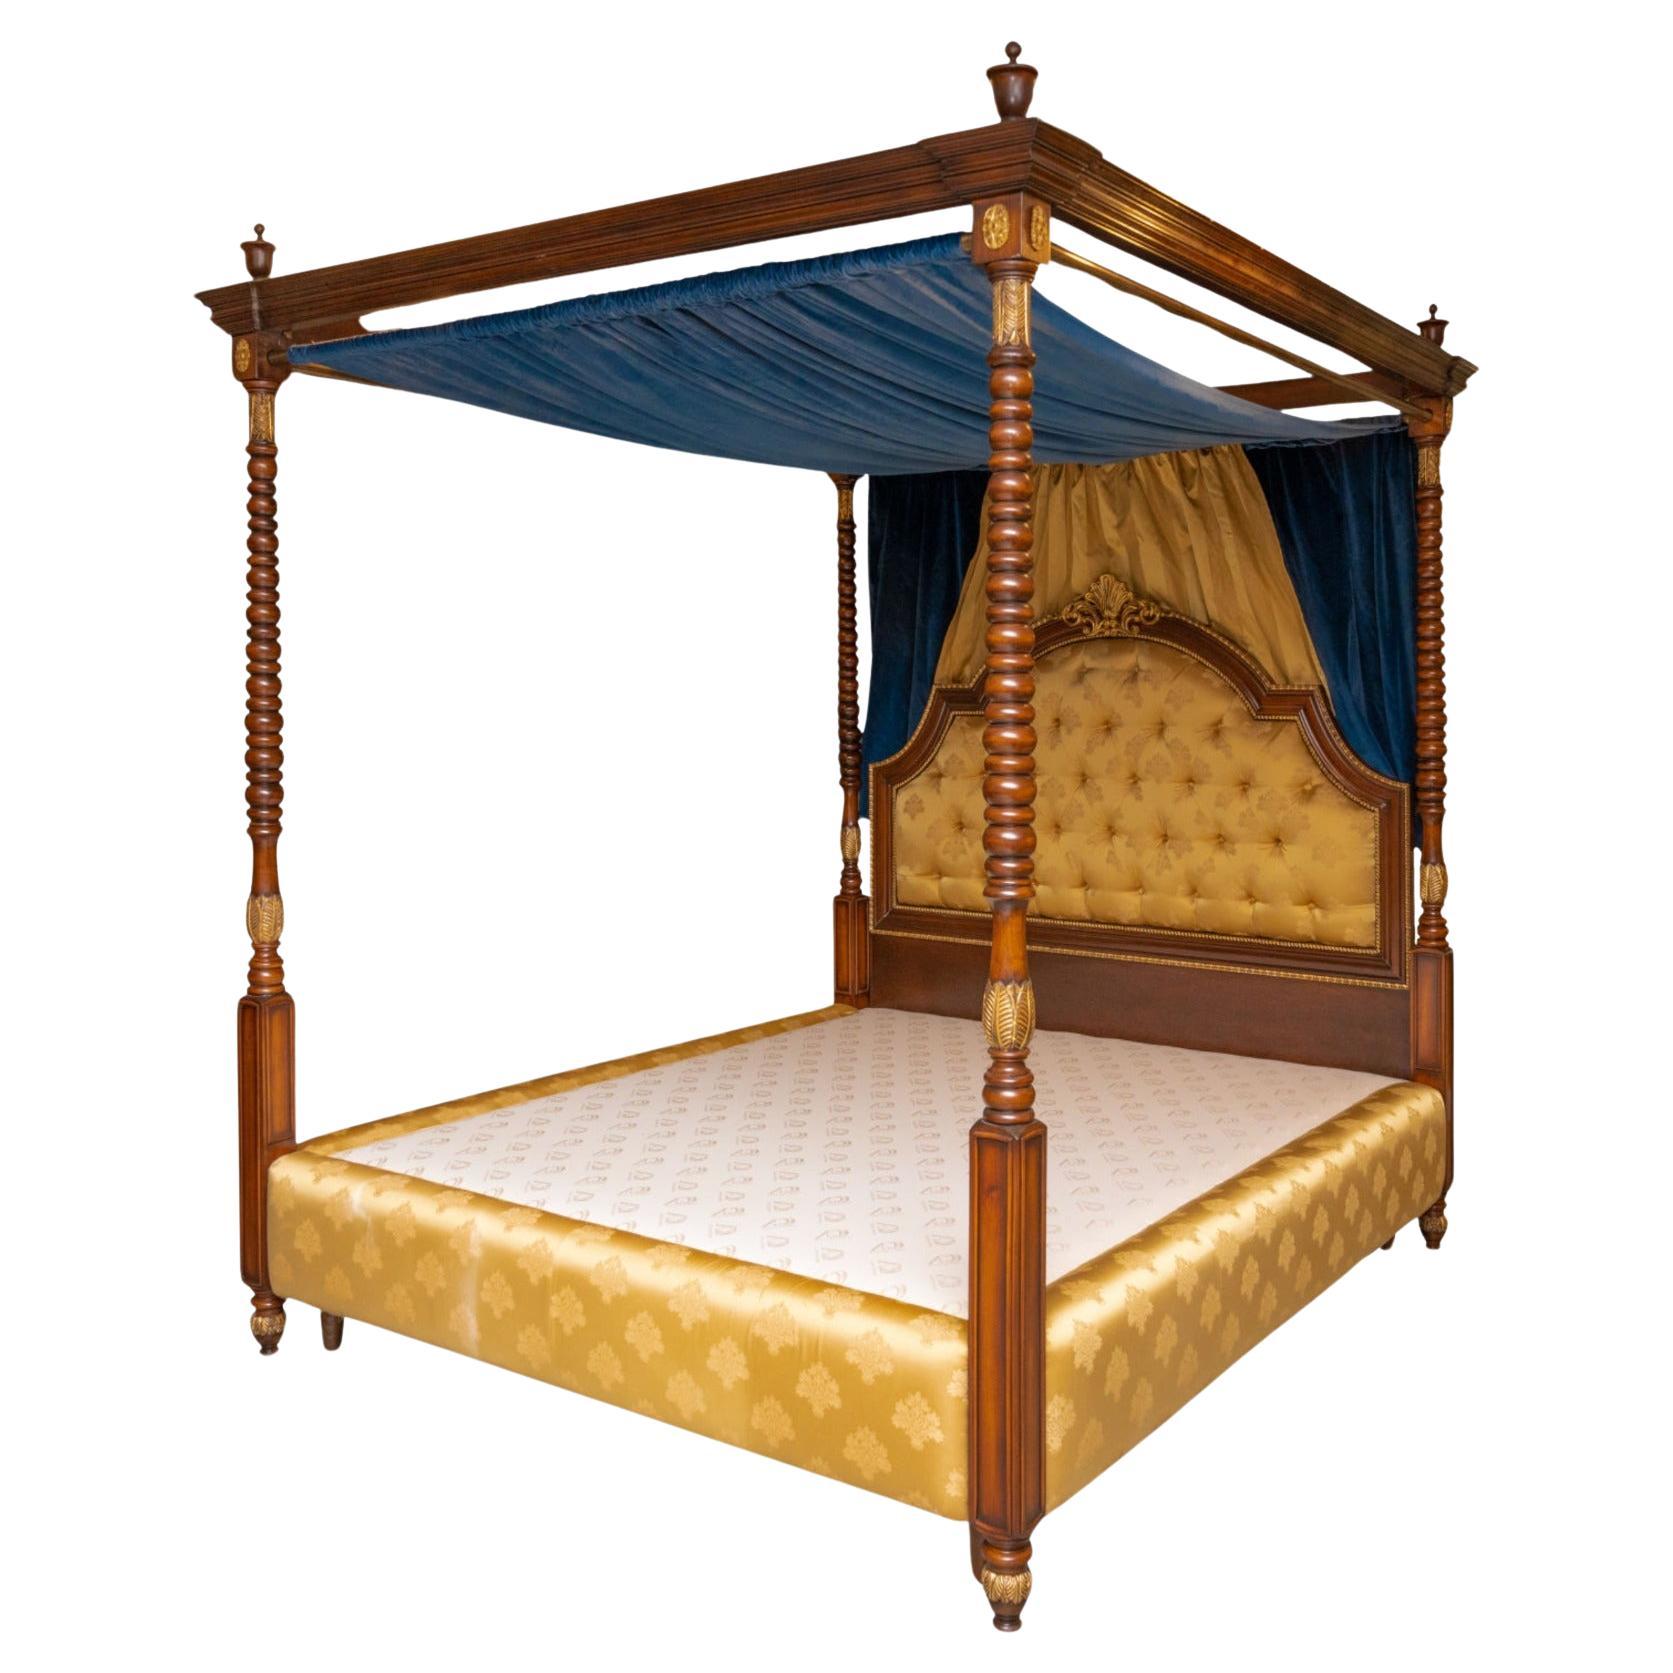 Important French Double Bed with Canopy, early 20th Century Style Empire